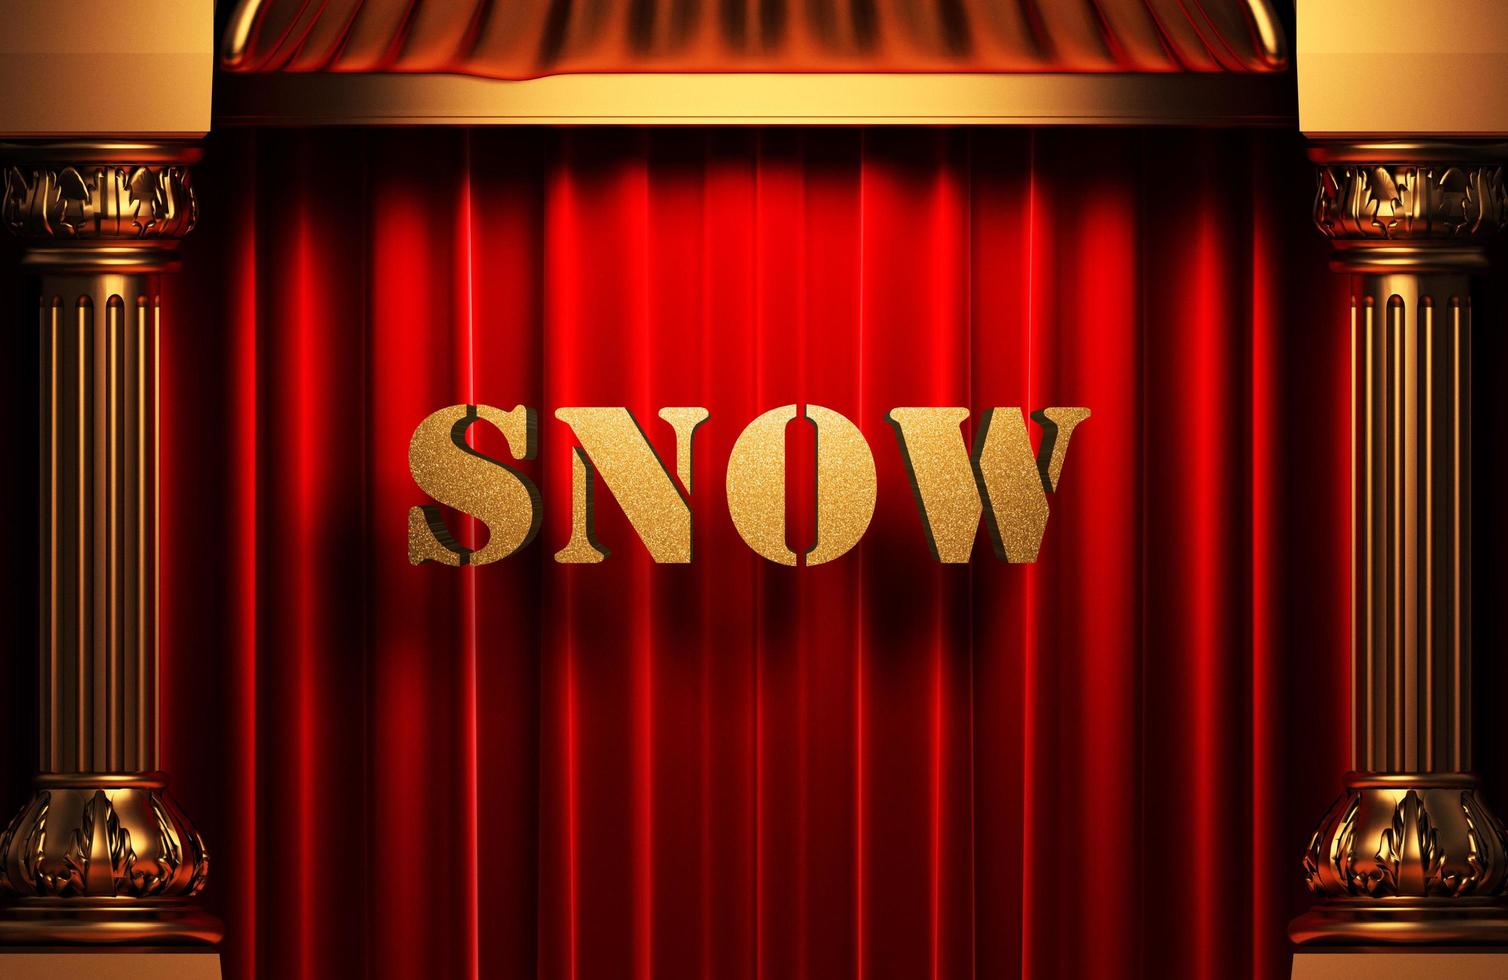 snow golden word on red curtain photo